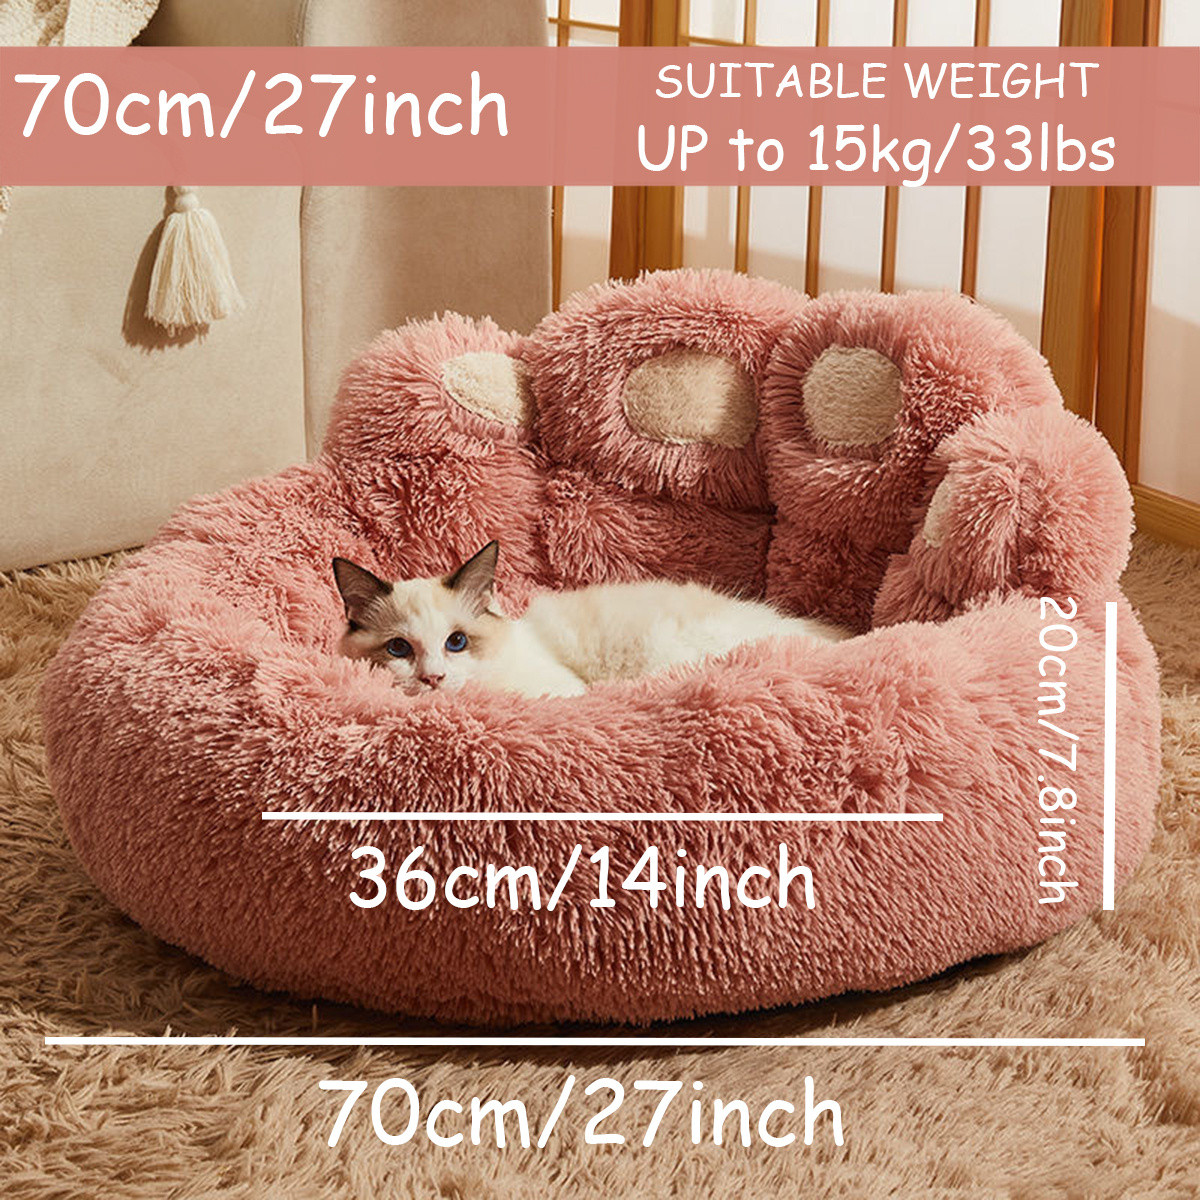 

Pet Round Bed Of Paw Shape, Calming Donut Dog Bed, Faux Fur Cat Bed For Cat, Comfortable And Soft, Machine Washable